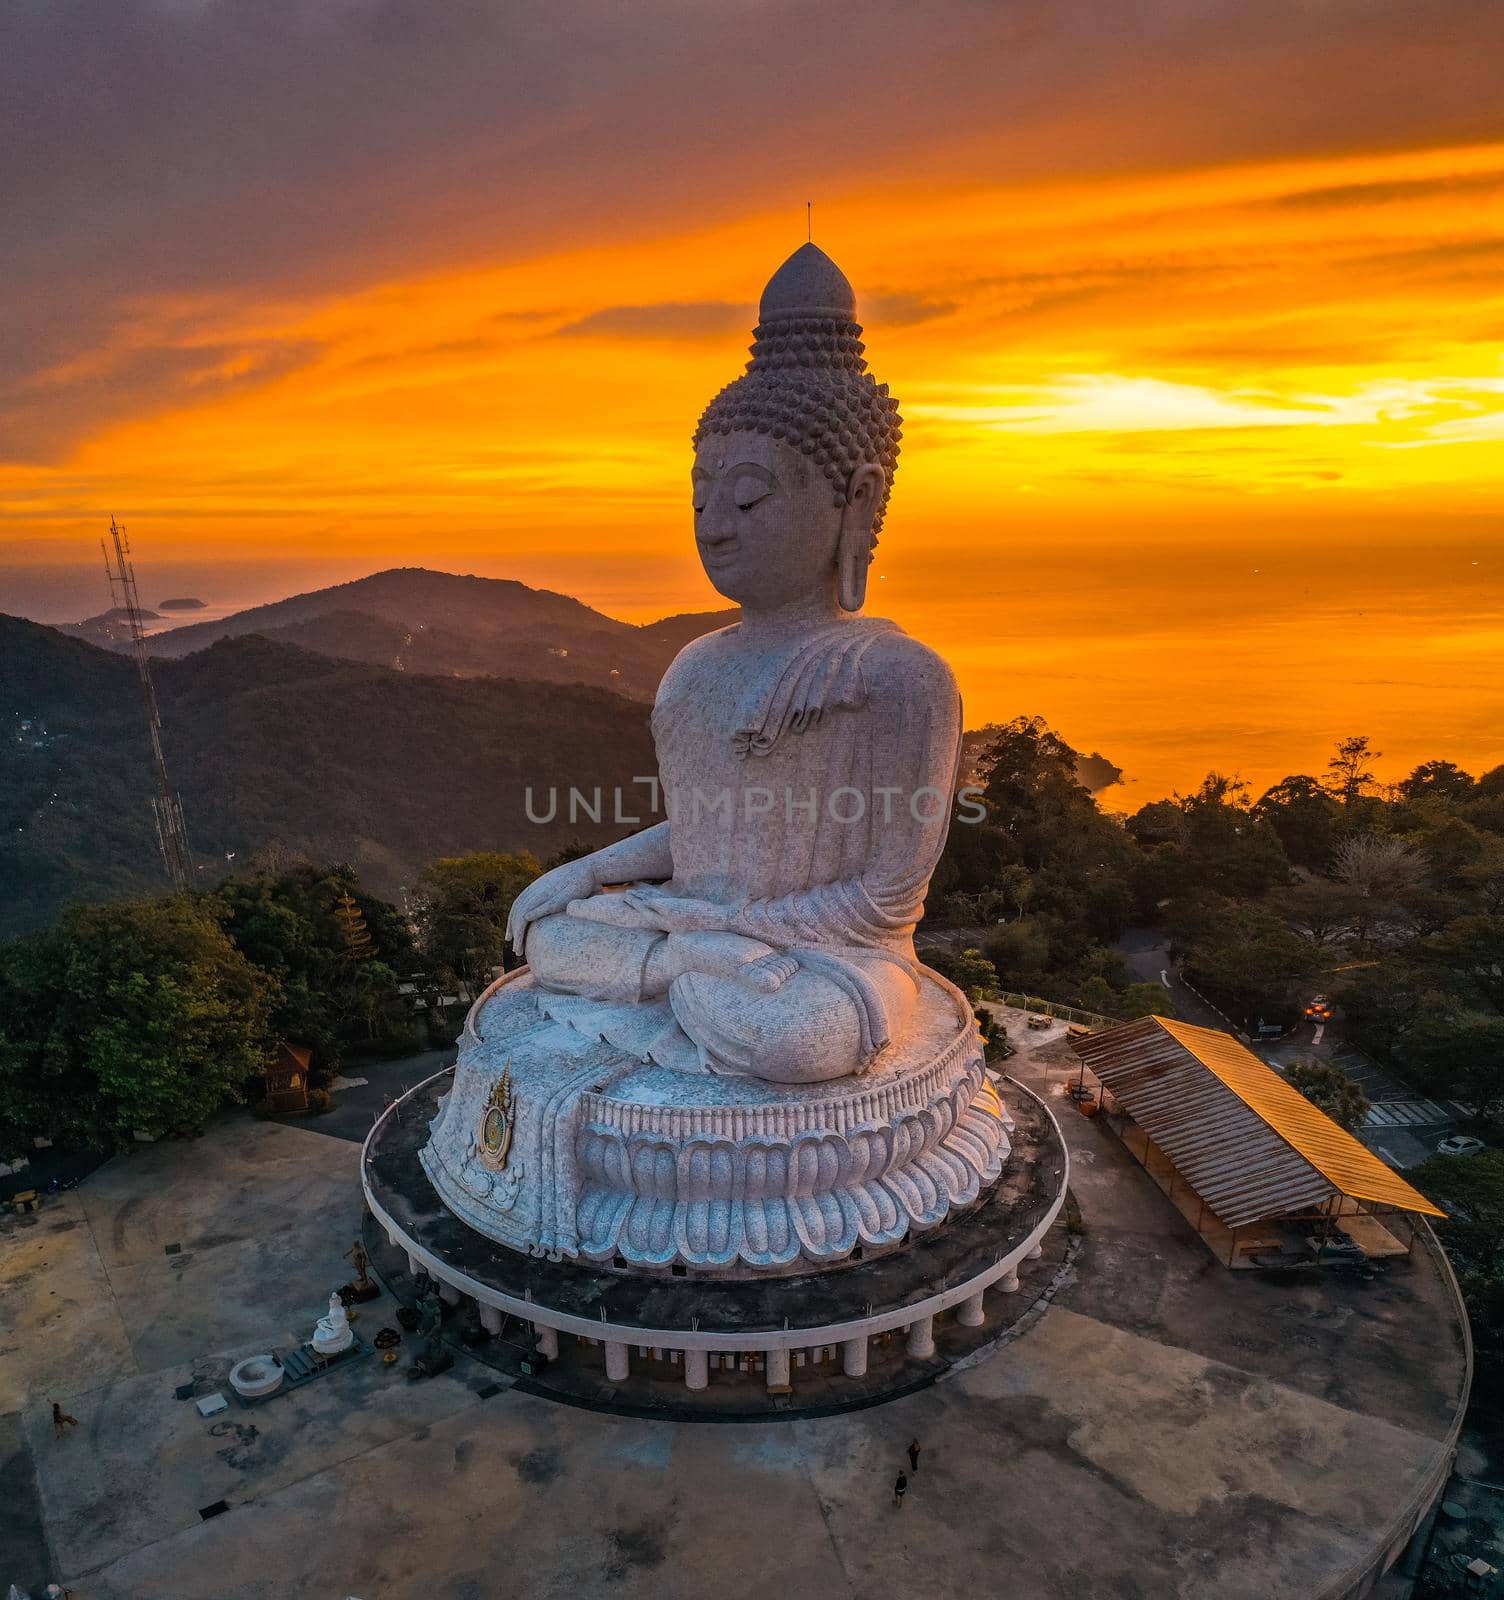 Aerial view of Big Buddha viewpoint at sunset in Phuket province, Thailand by worldpitou